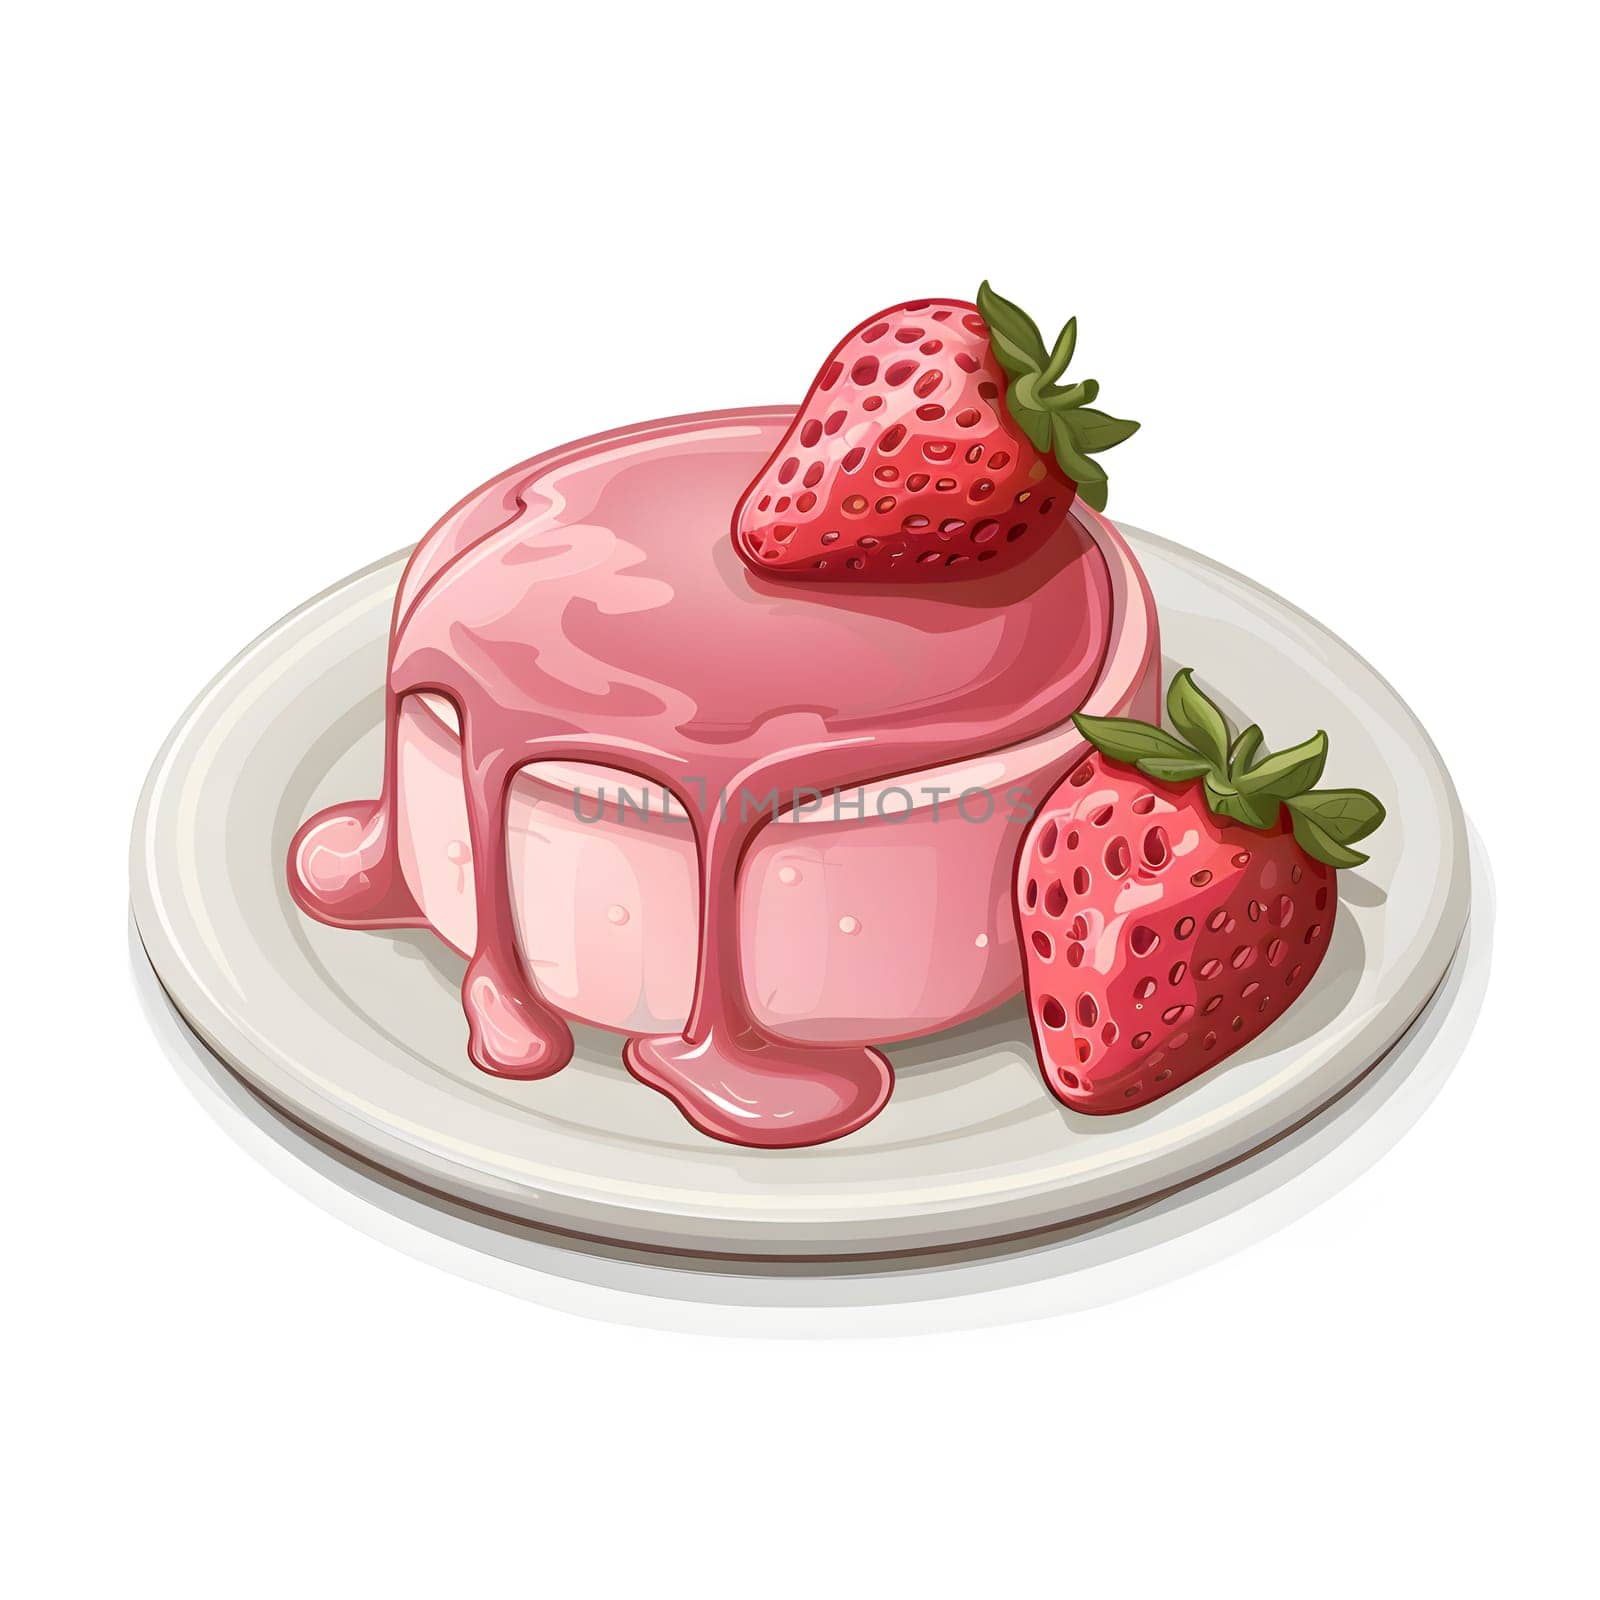 A delicious strawberry pudding served with a fresh strawberry on top, presented on a rectangular plate